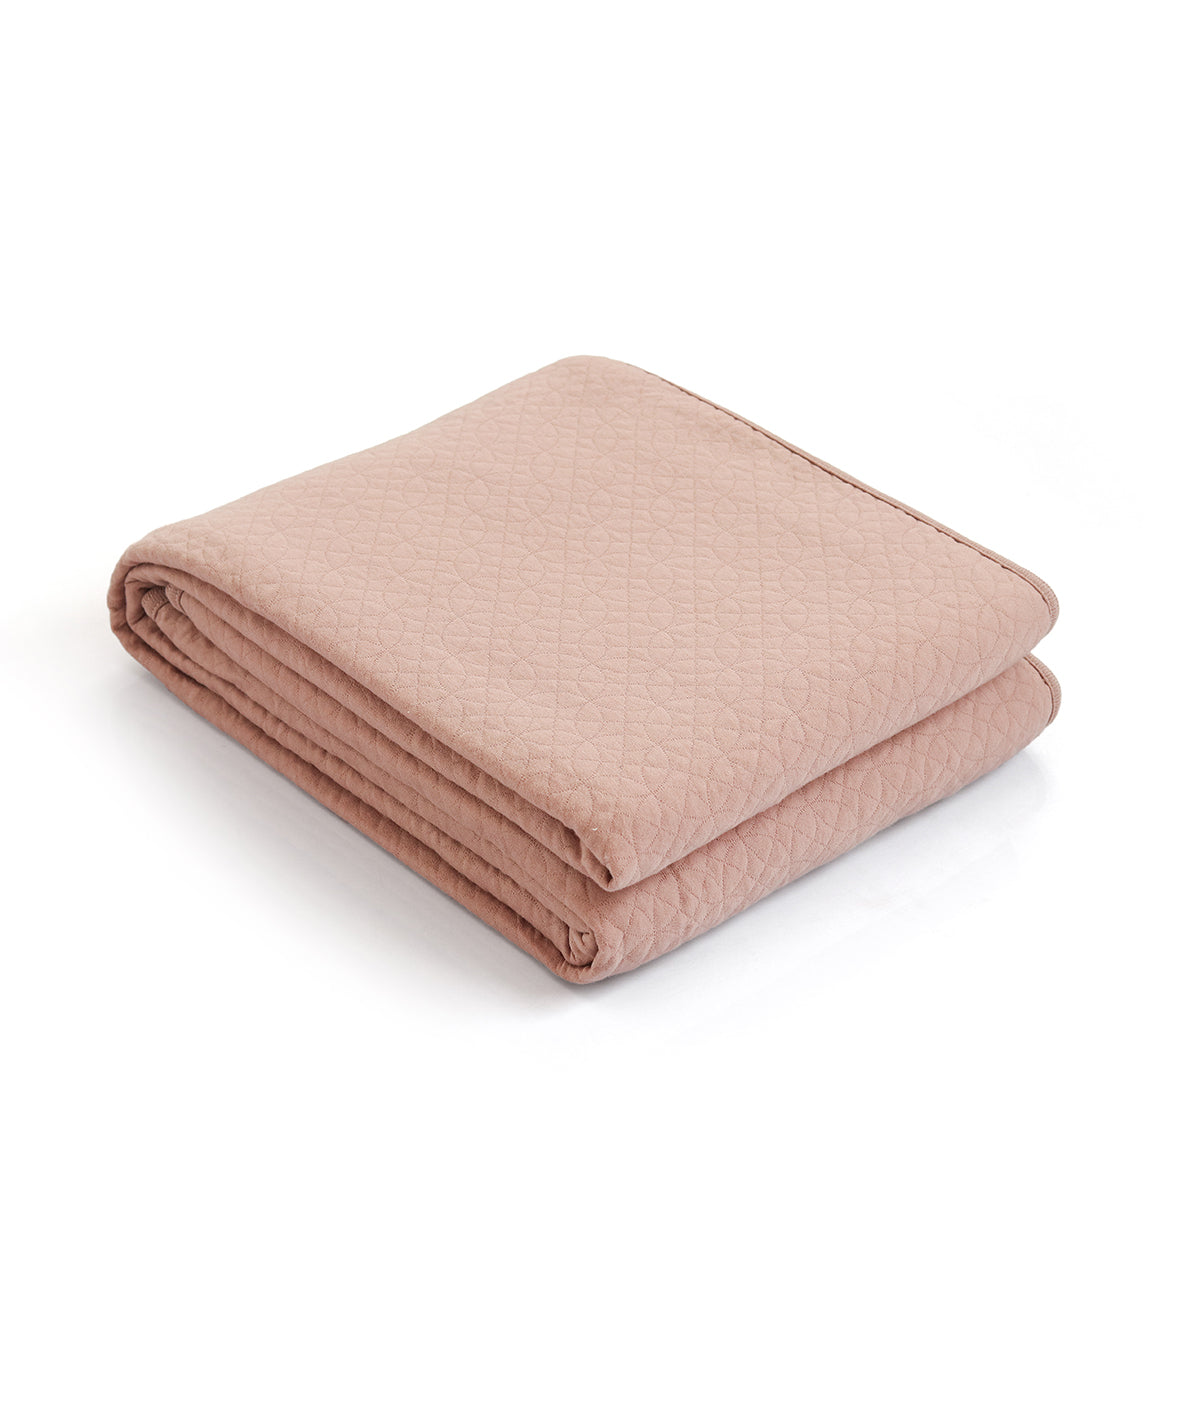 Cloud Jersey Cotton Knitted Single Bed Dohar / Quilt (Pale Pink)